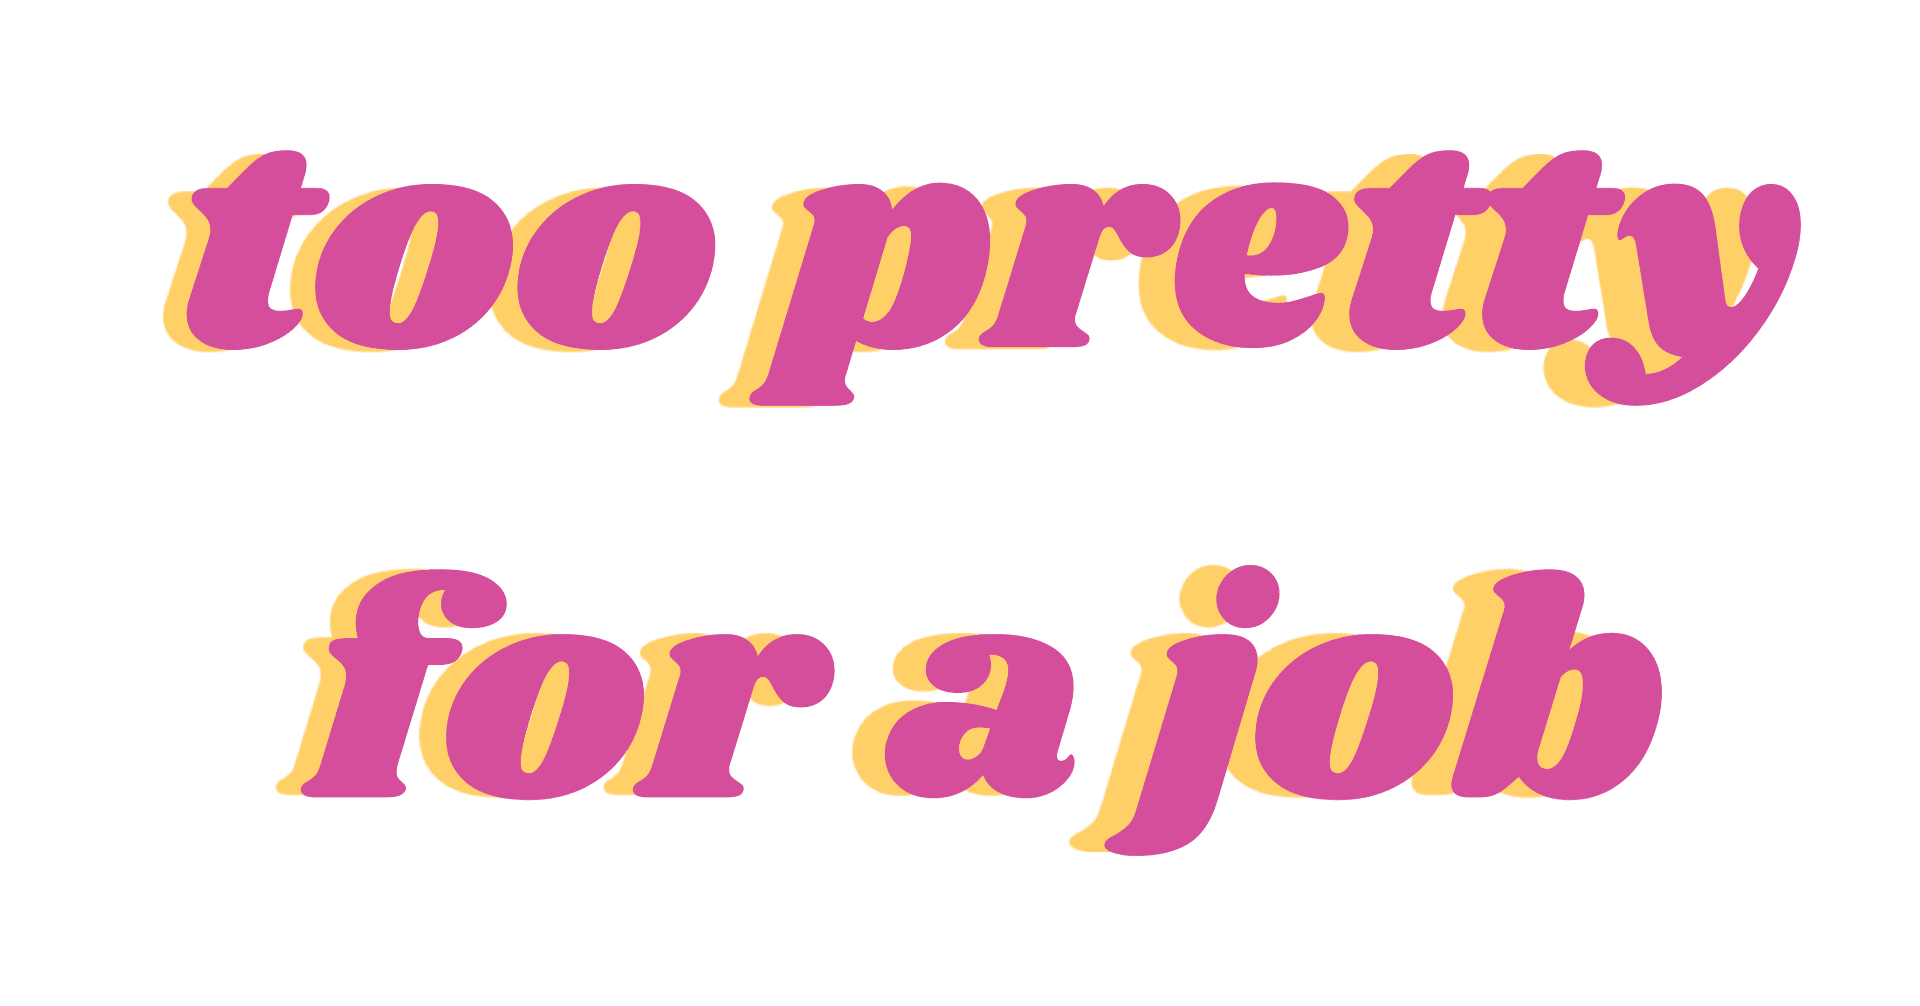 too pretty for a job tee